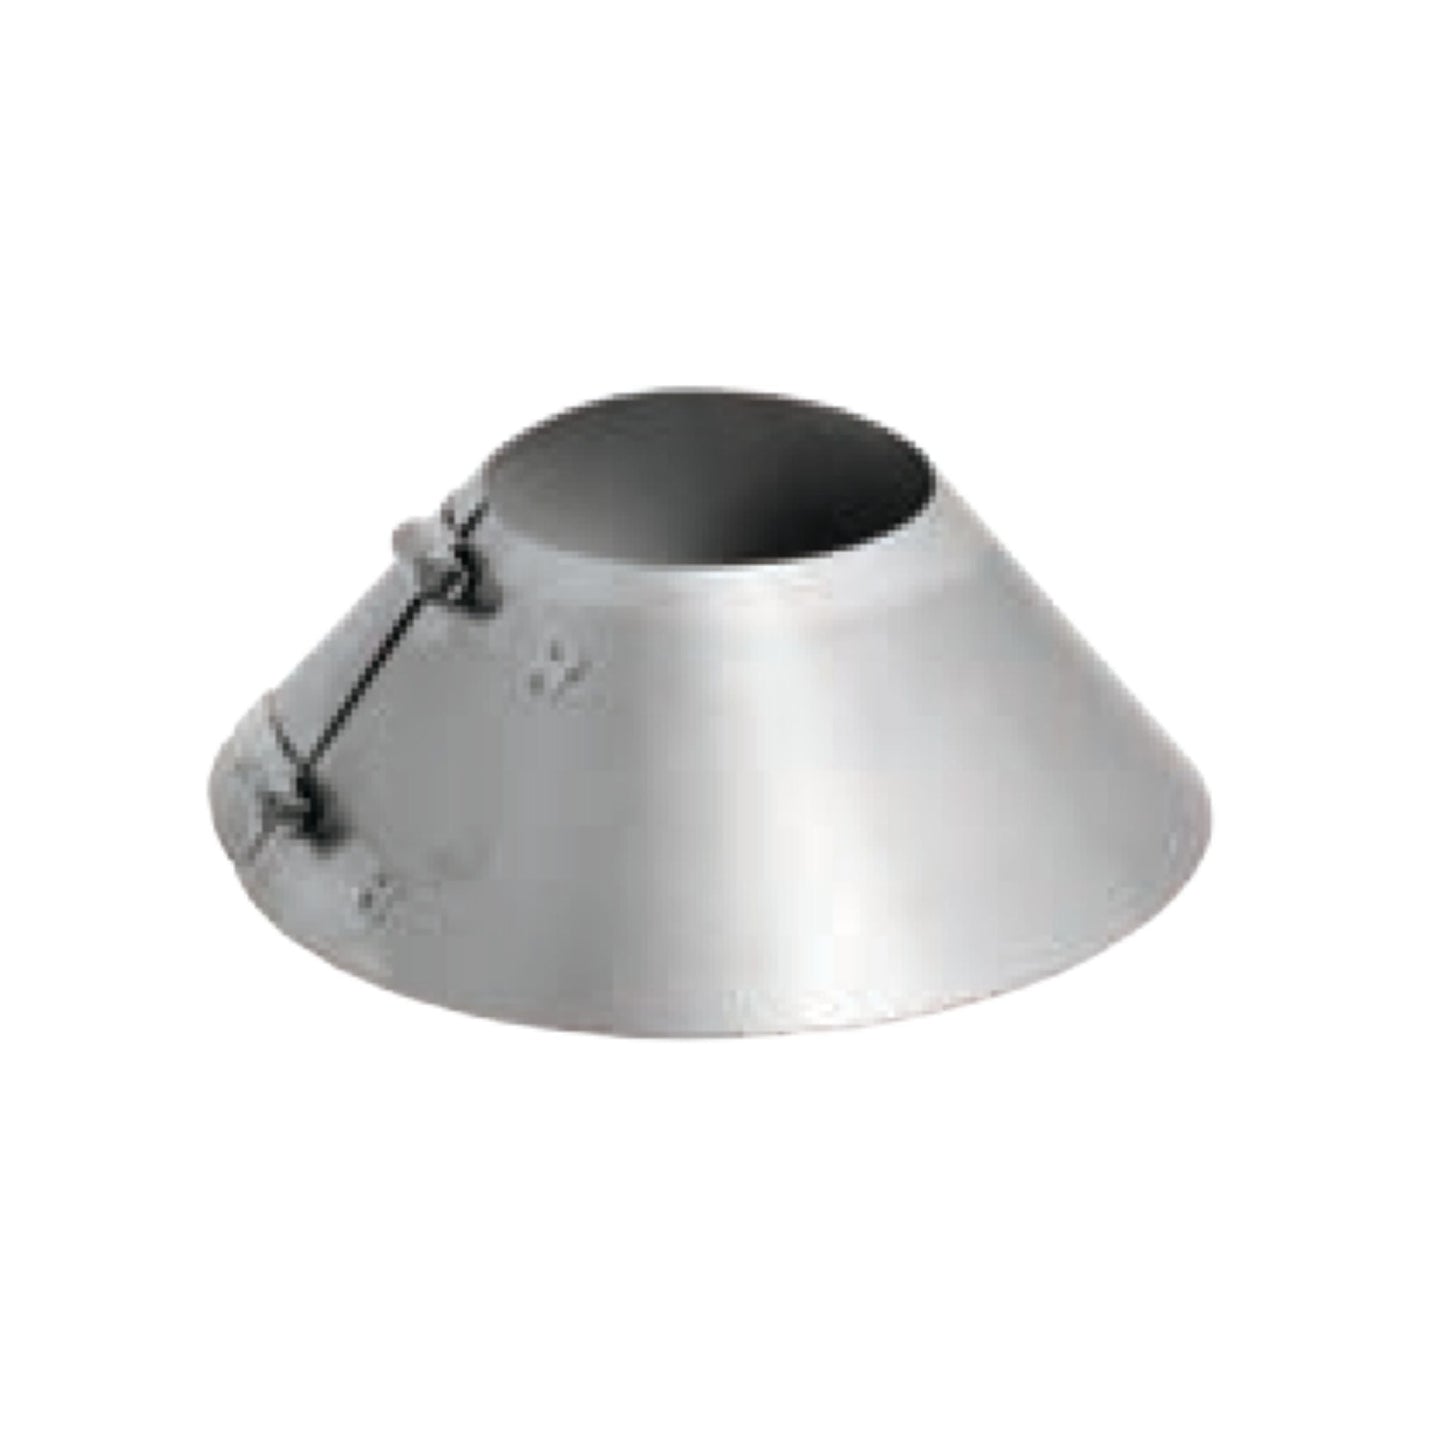 DuraVent FasNSeal 12" 29-4C Stainless Steel Storm Collar